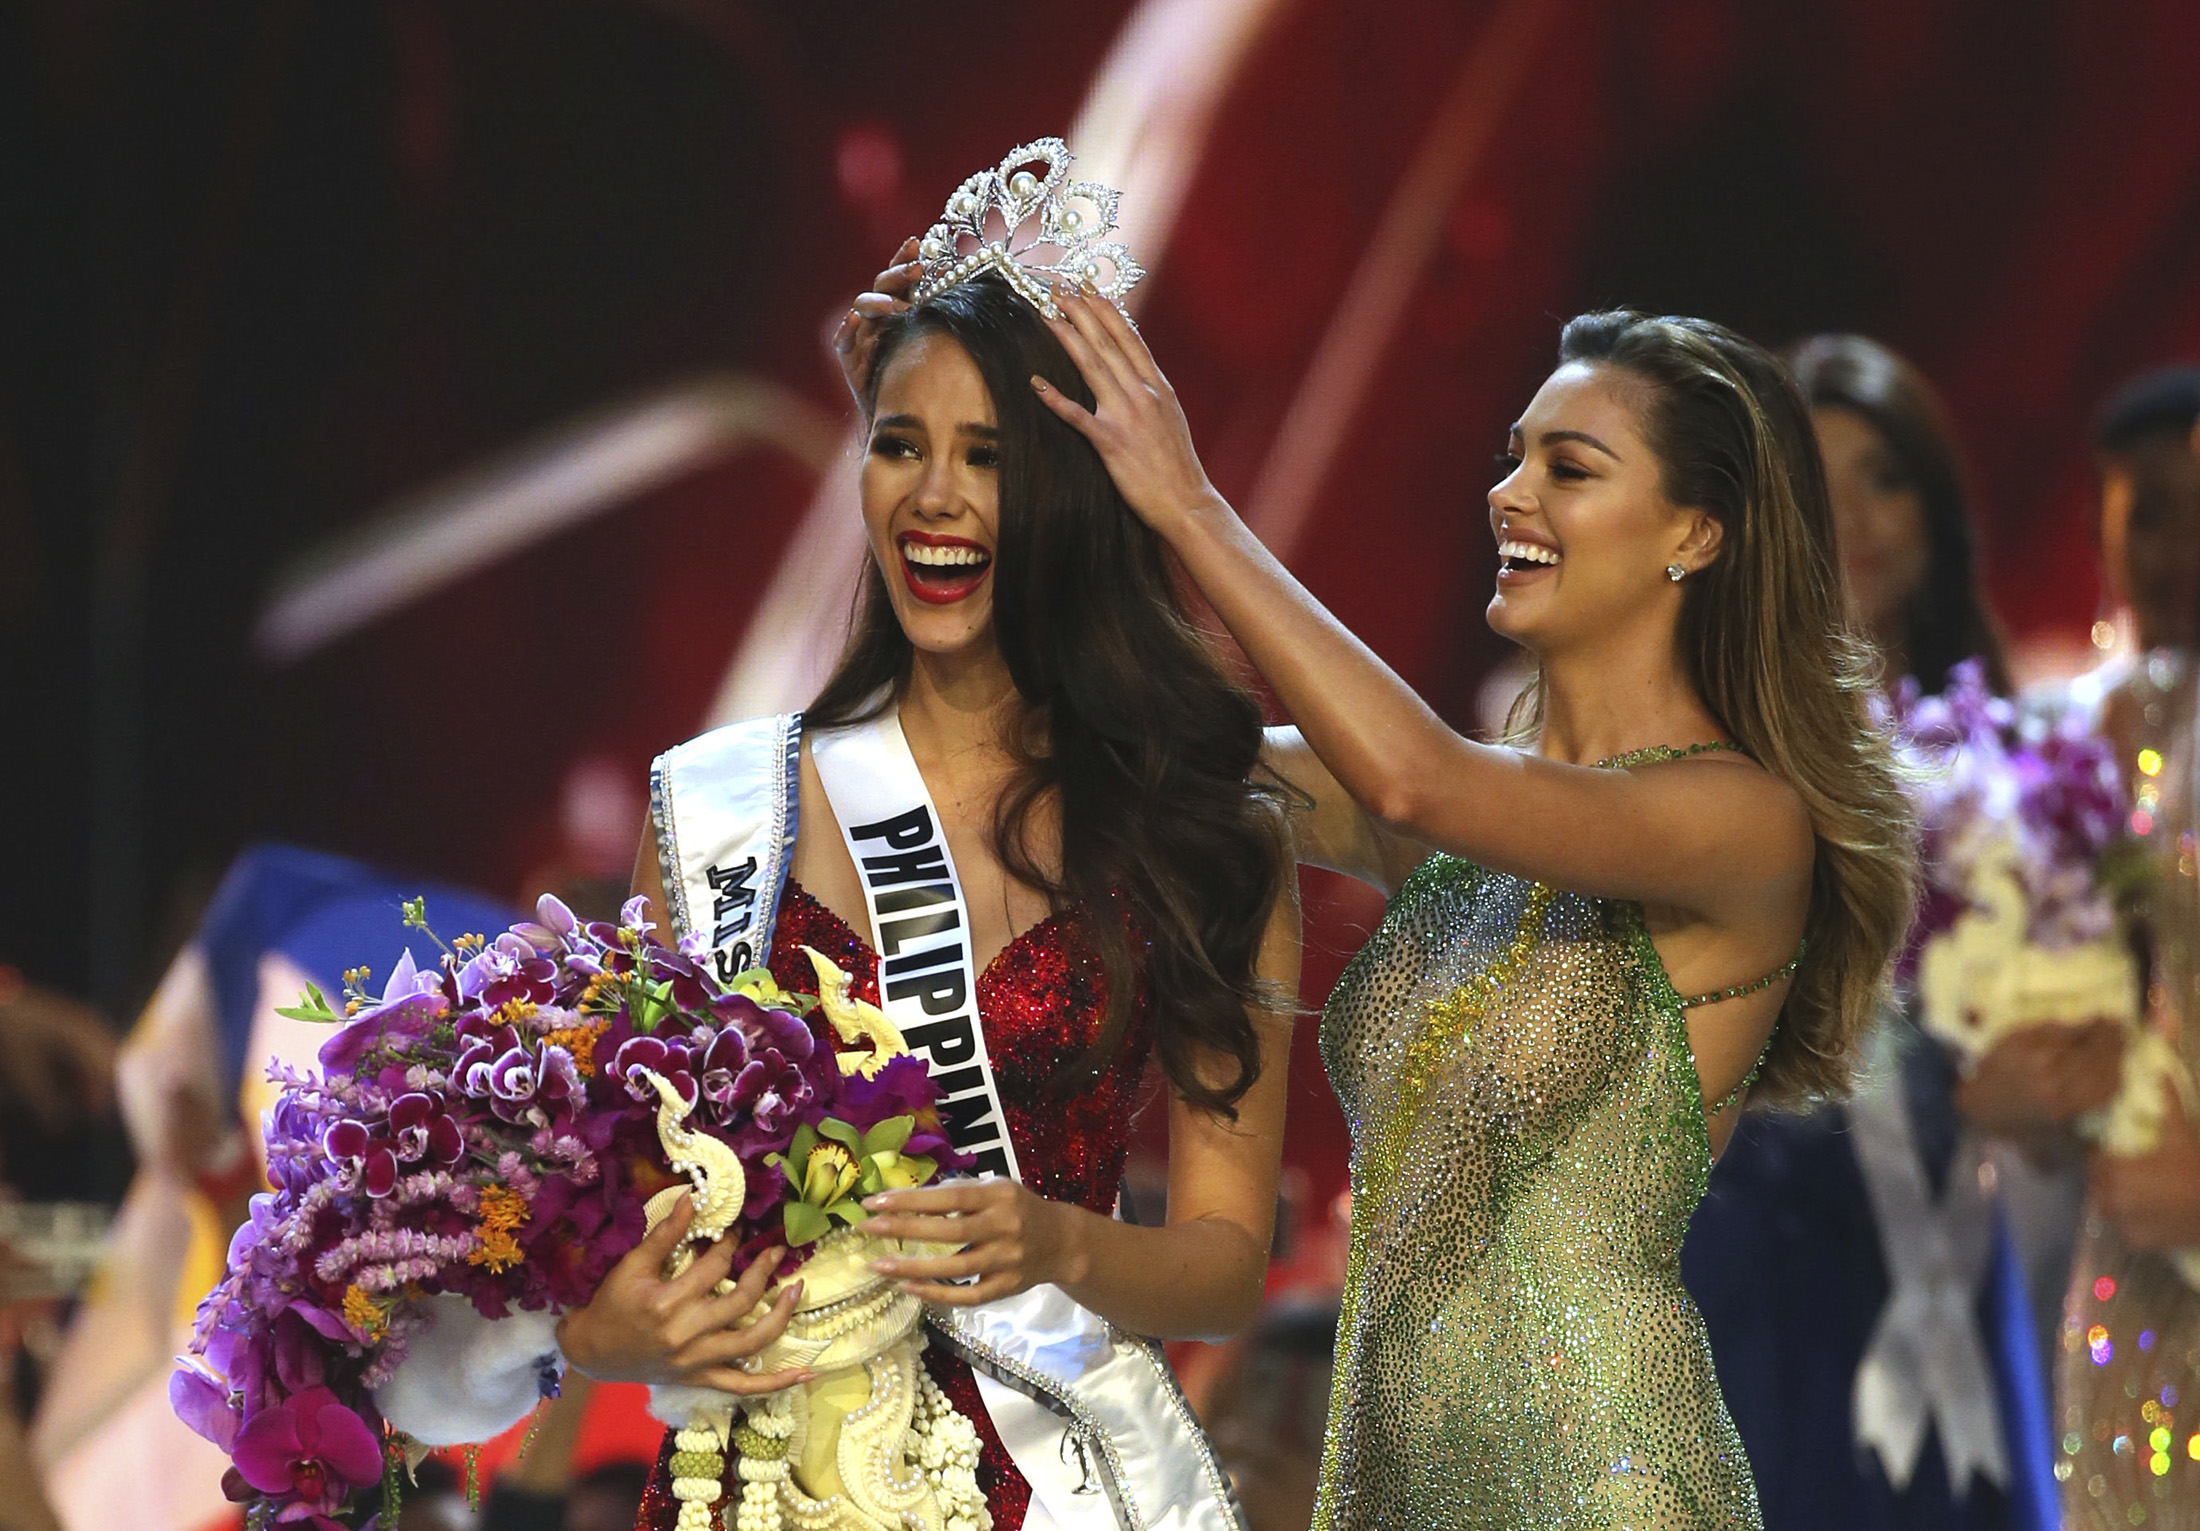 Miss Universe 2018 Catriona Gray's Winning Gowns & Prizes! - For Urban  Women - Awarded Top 100 Urban Blog / Fashion, Lifestyle and Travel